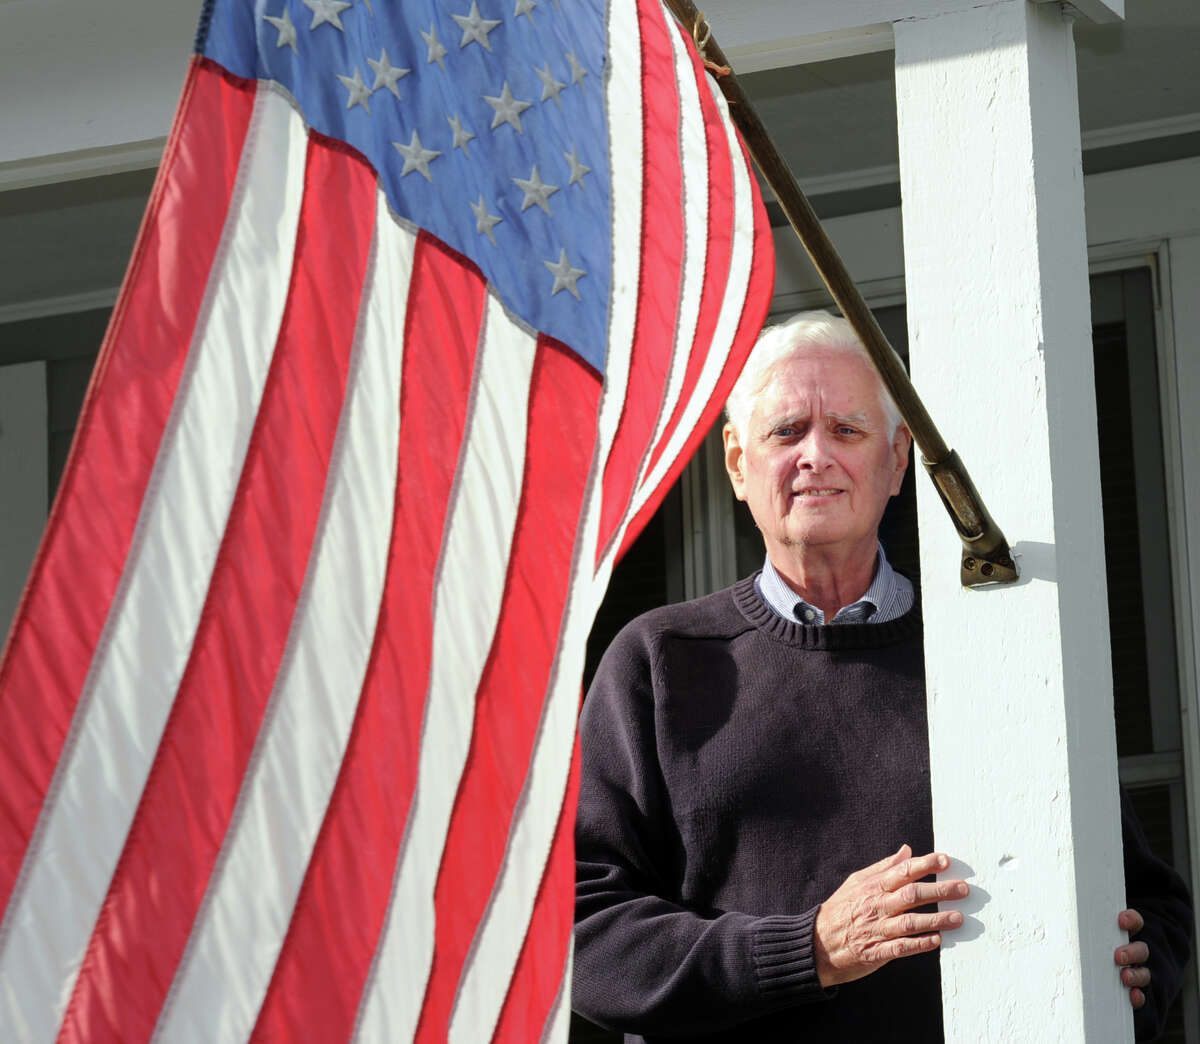 The newly sworn in Greenwich Selectman John Toner stands by the American Flag at his home in the Glenville section of Greenwich, Conn., Friday, Jan. 16, 2015.